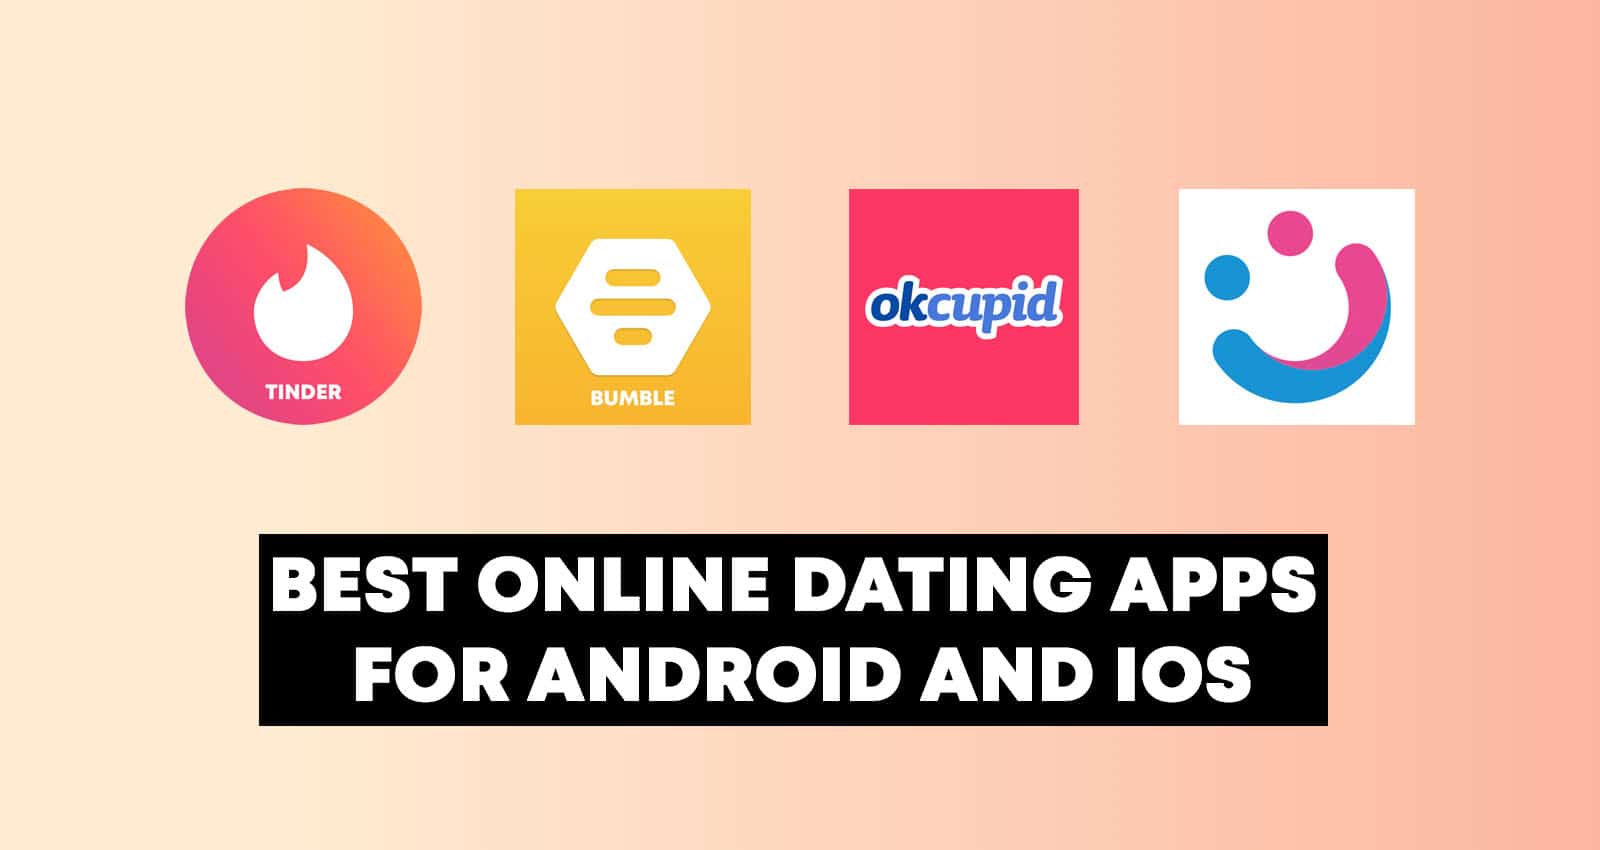 Online dating apps